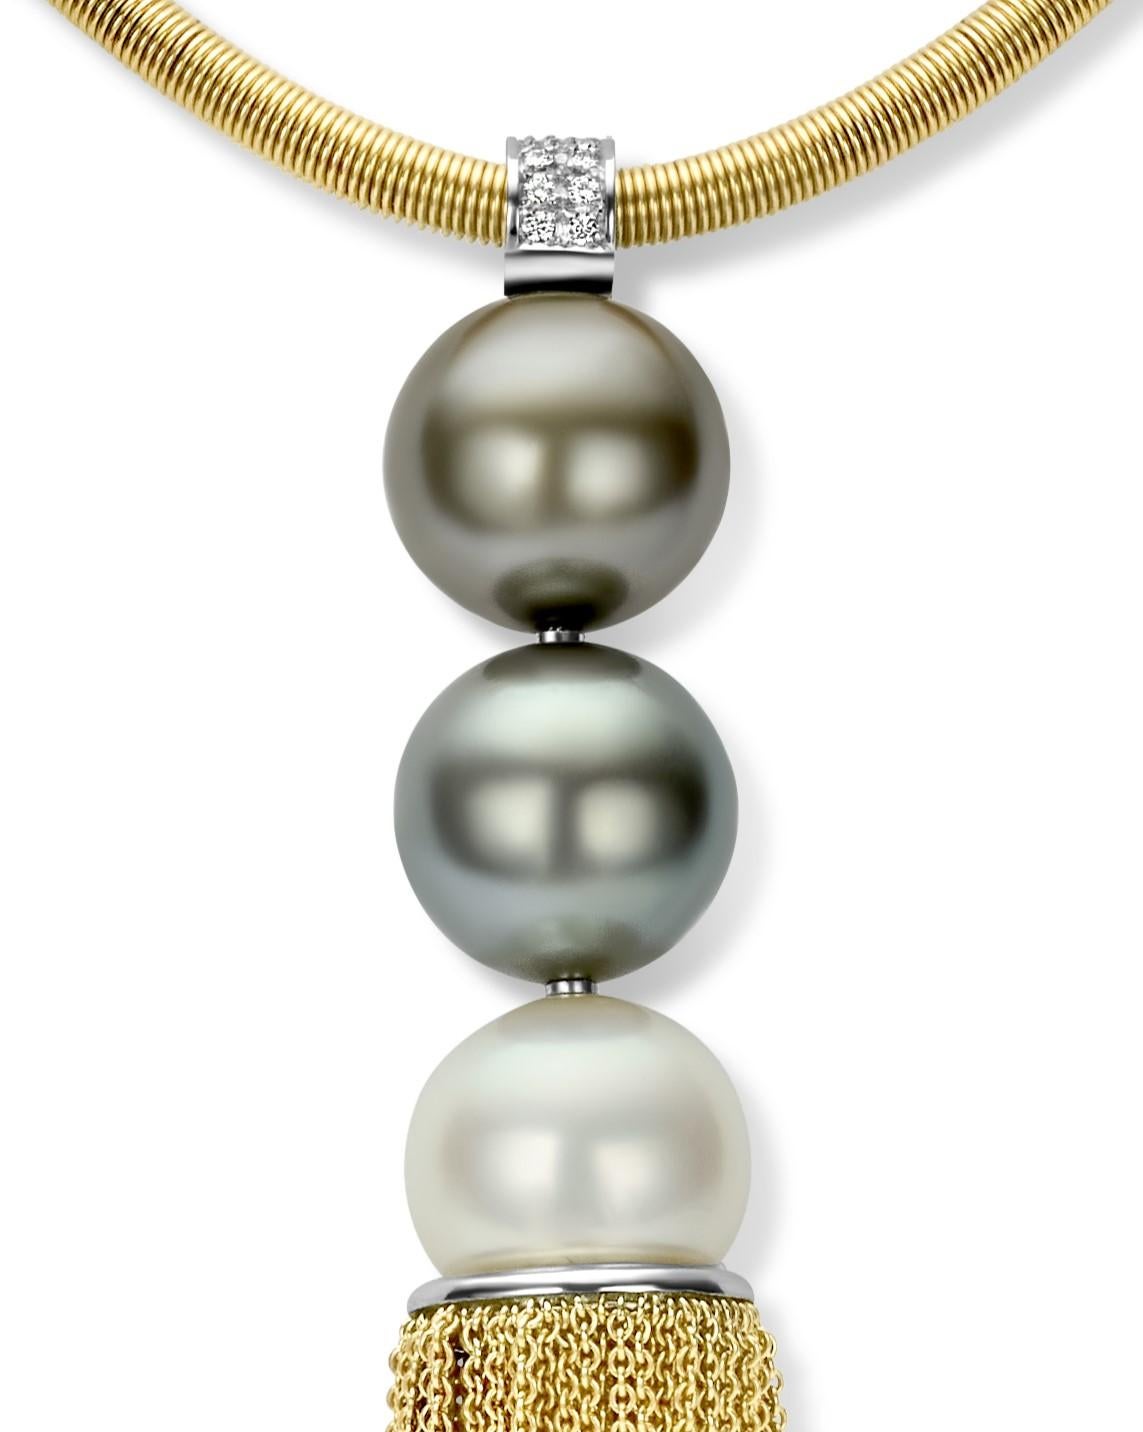 Artisan 18k Gold Pendant with 0.35ct Diamonds & Tahiti pearls, Floche. Rat Tail Necklace For Sale